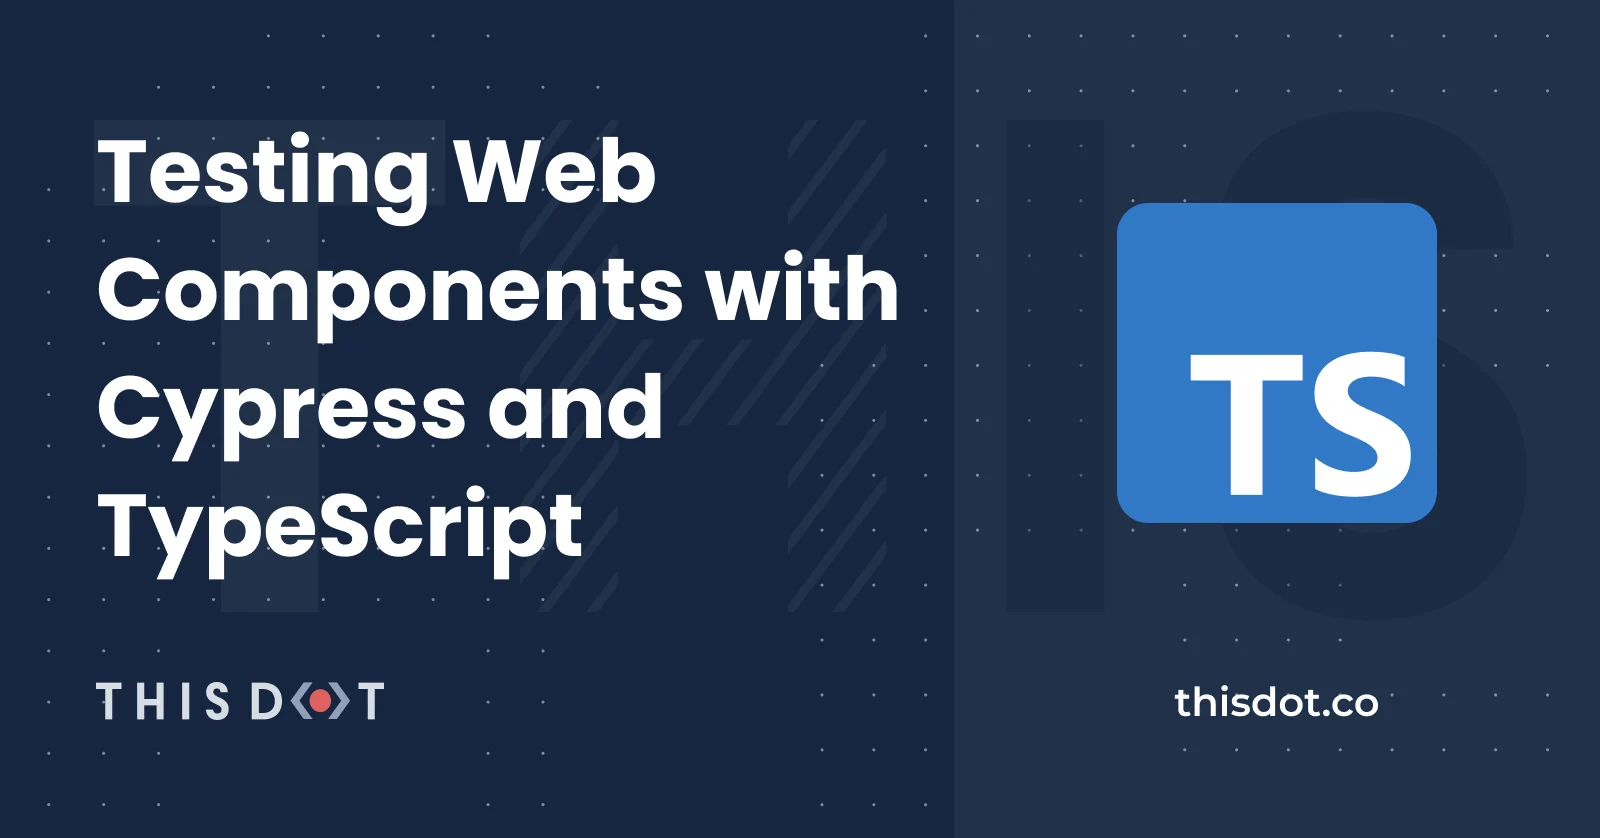 Testing Web Components with Cypress and TypeScript